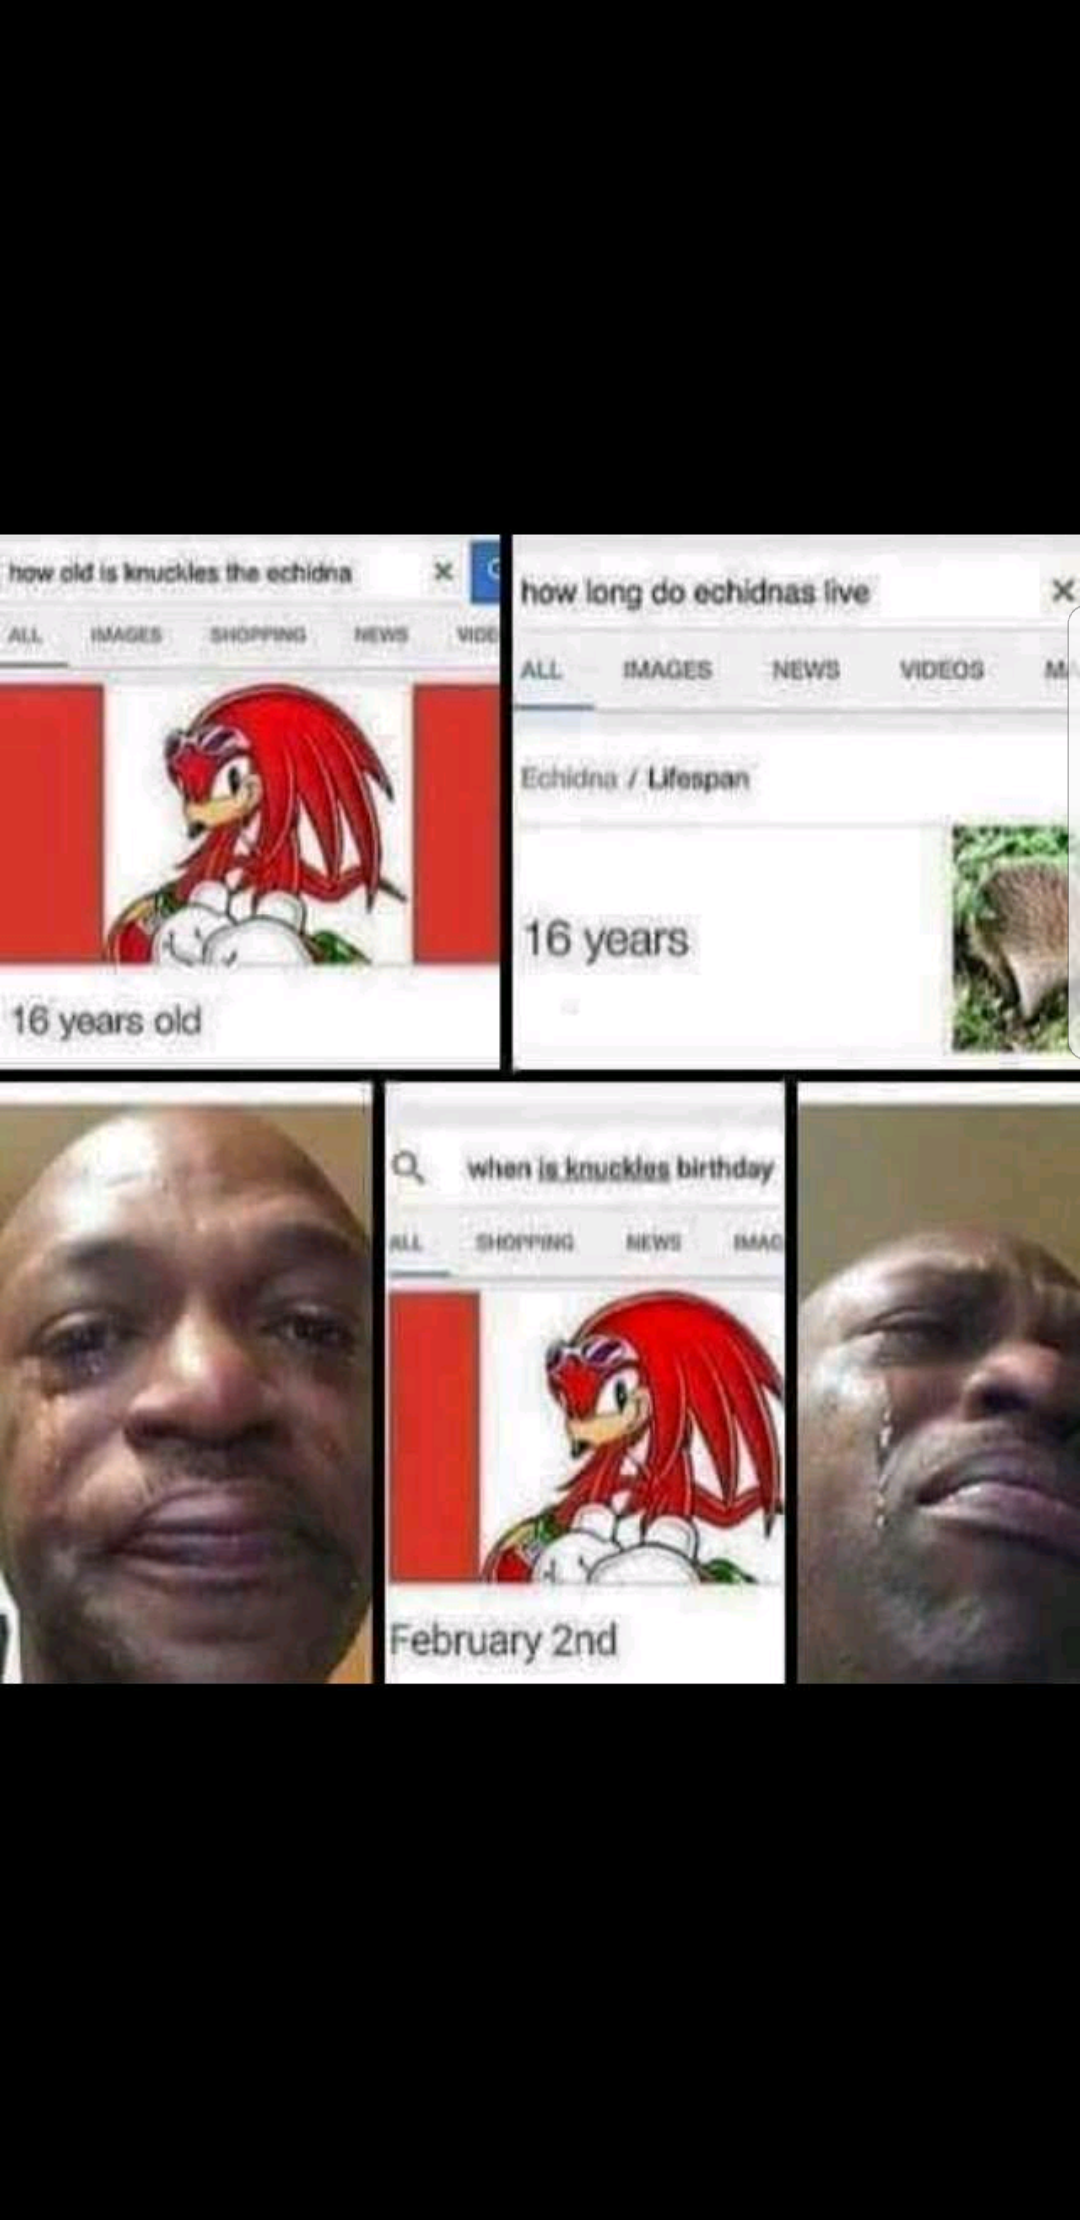 Rest in pieces knuckles